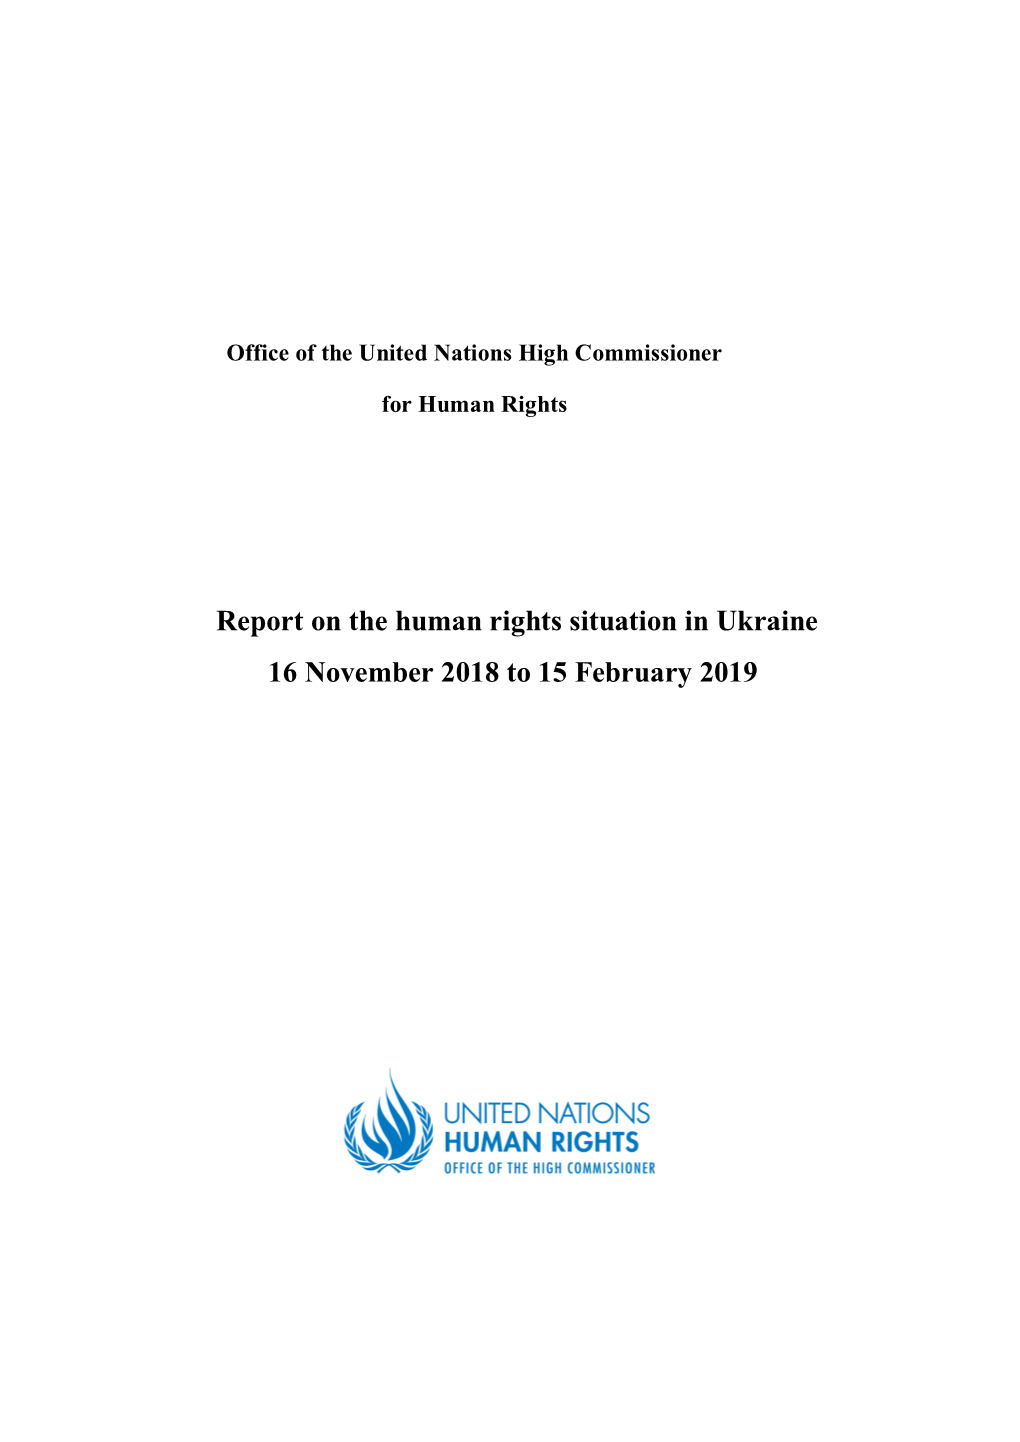 Report on the Human Rights Situation in Ukraine 16 November 2018 to 15